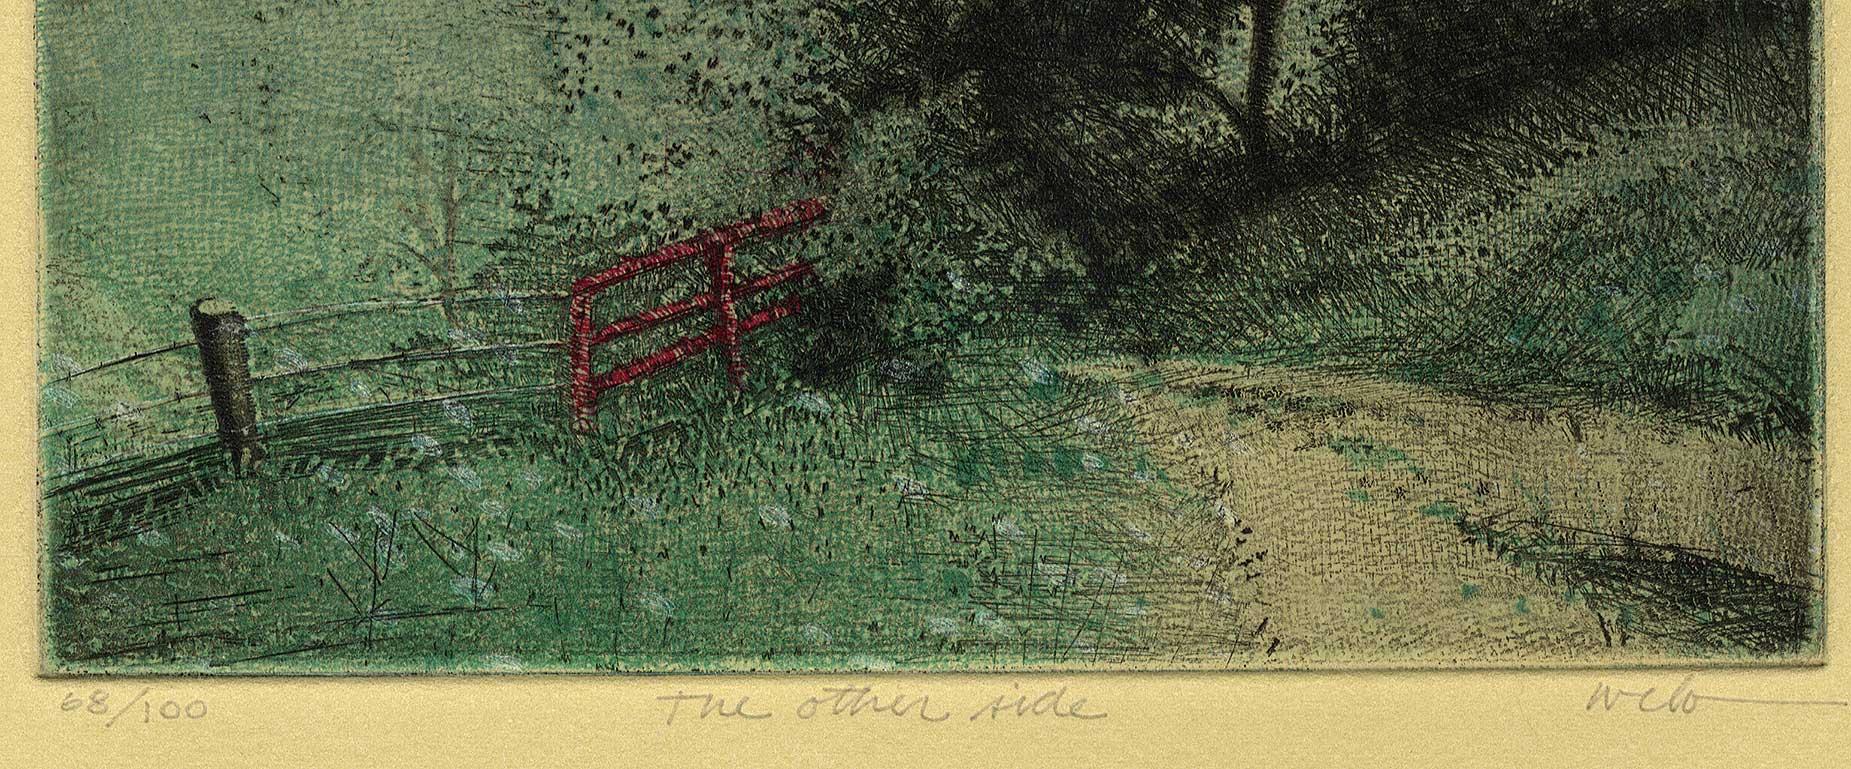 The Other Side (good fences make good neighbors) - American Modern Print by Larry Welo